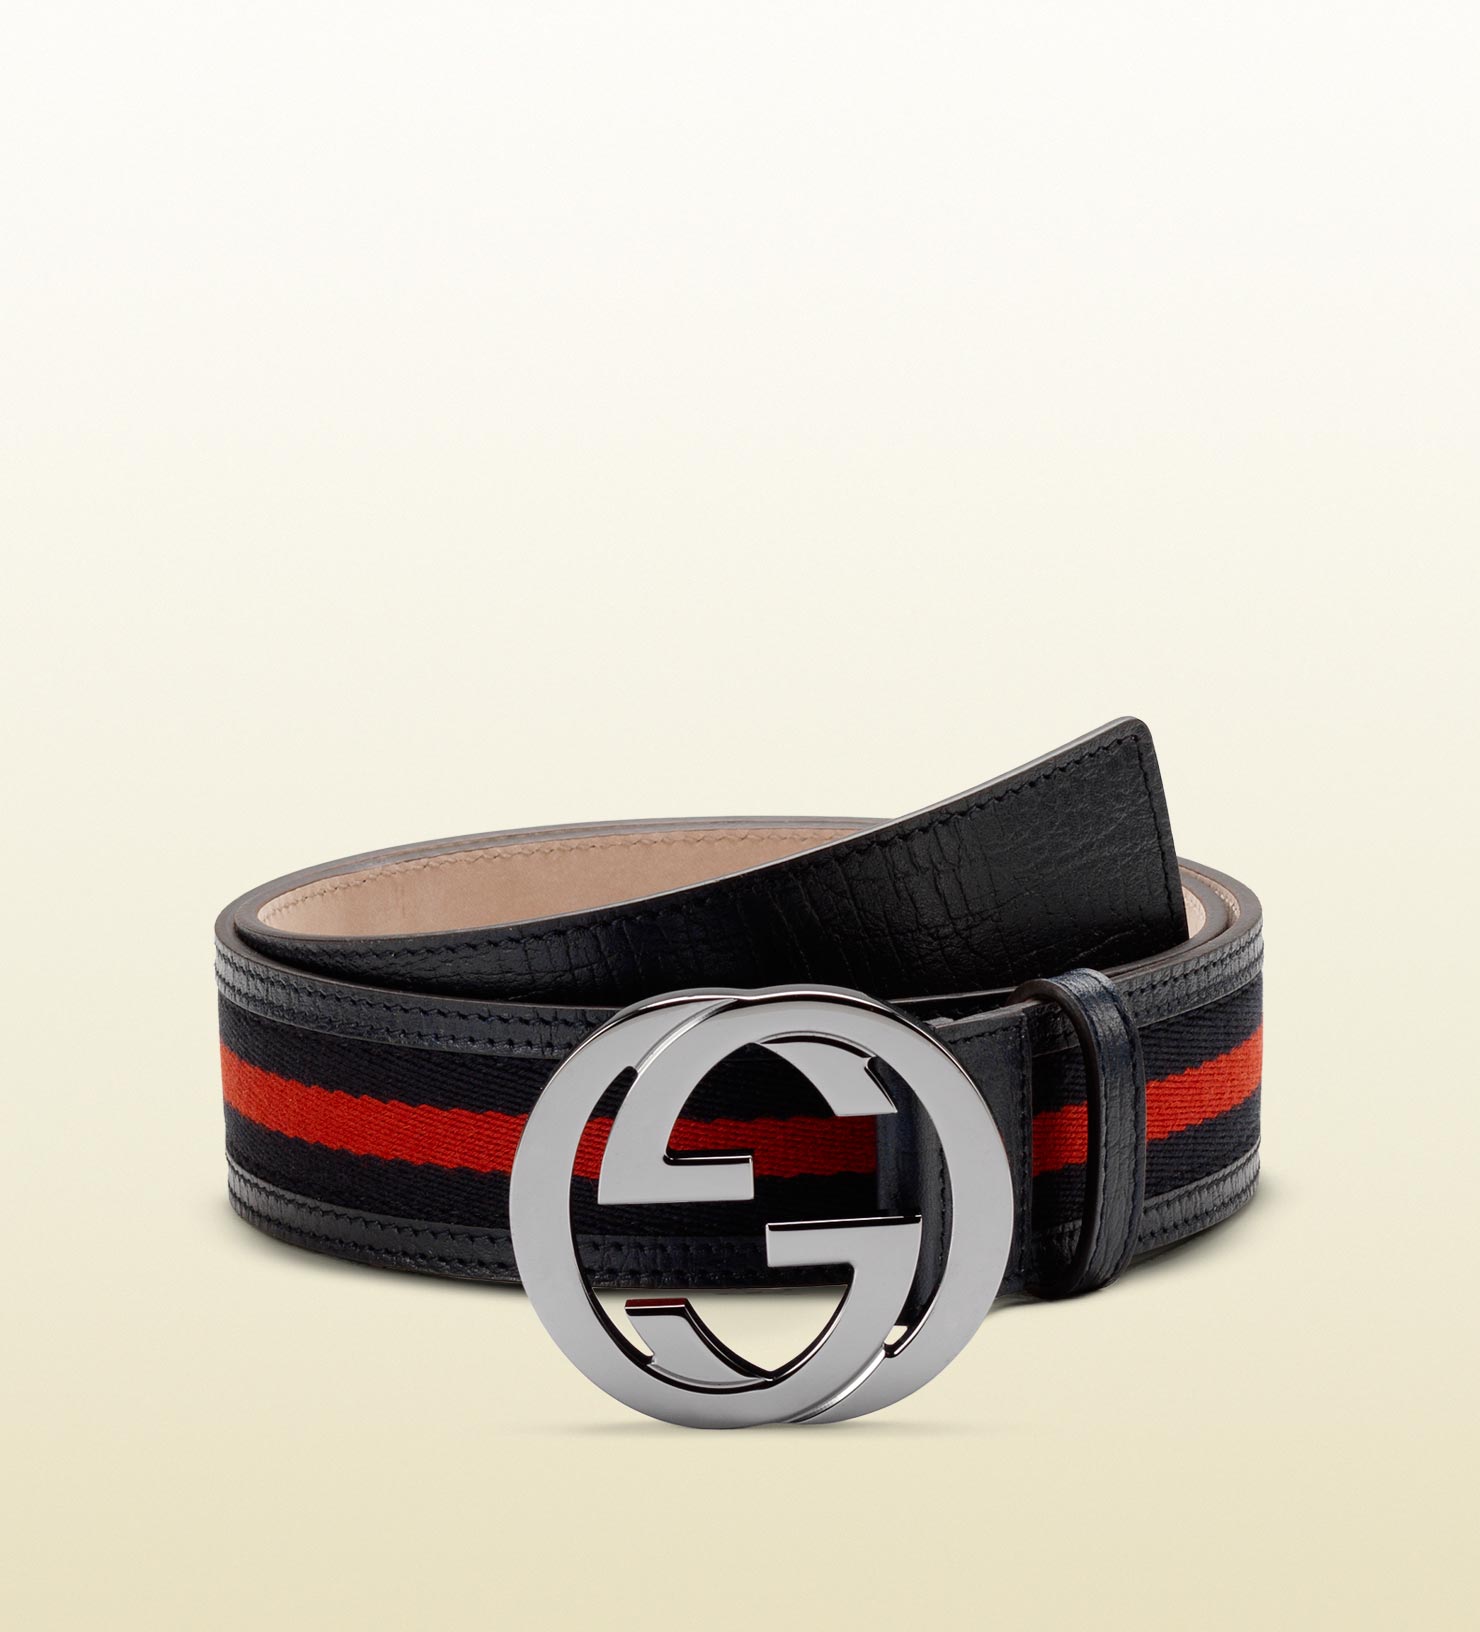 Gucci Signature Web Belt With Interlocking G Buckle in Black for Men - Lyst